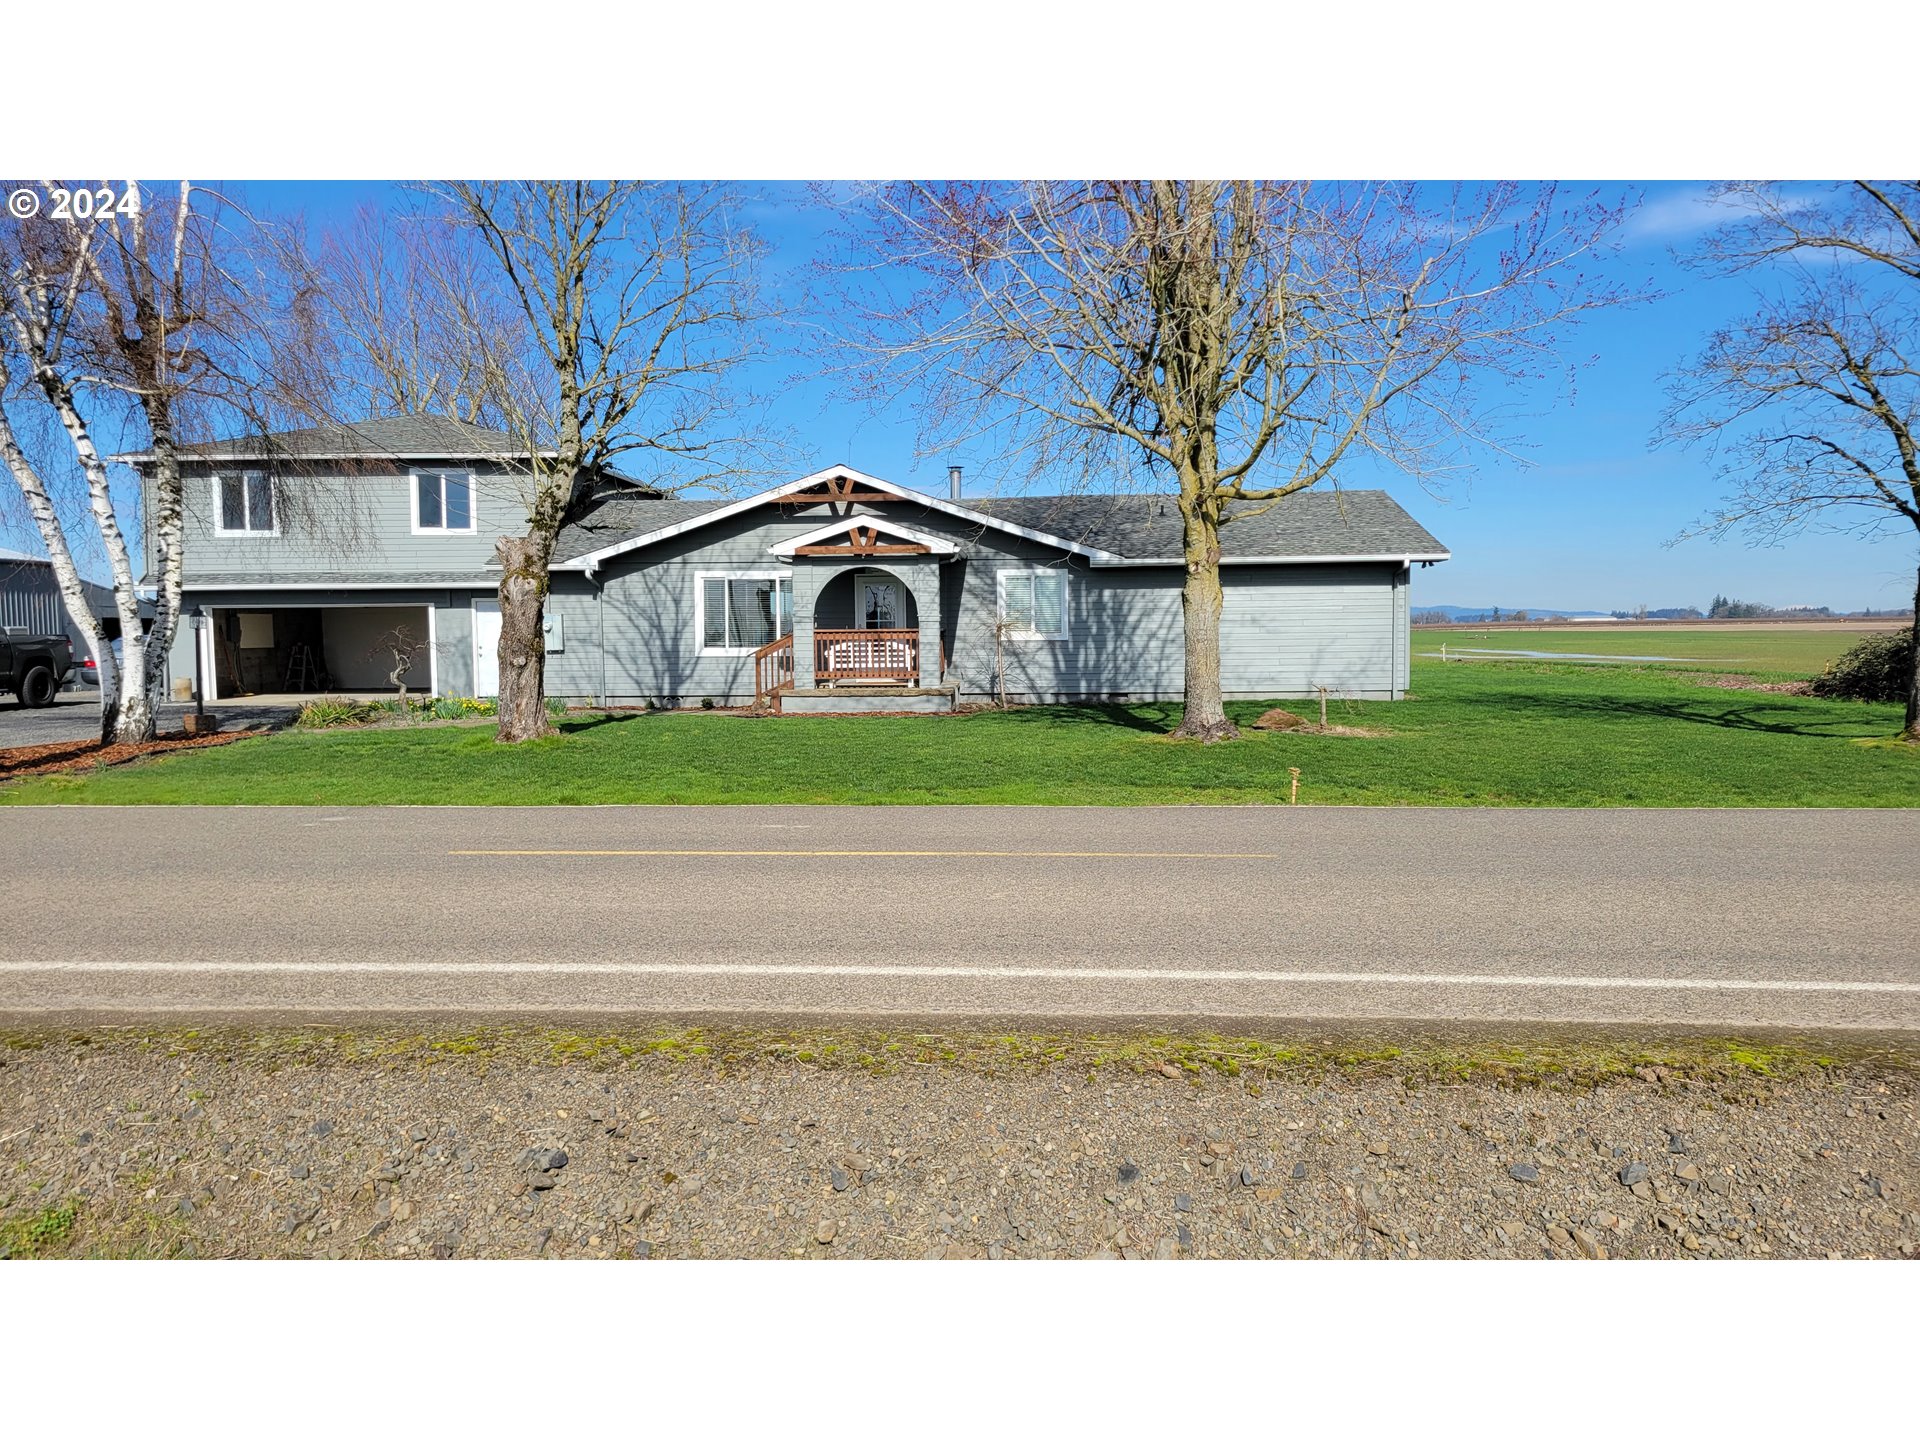 4701 CONCOMLY RD, Gervais, OR 97026